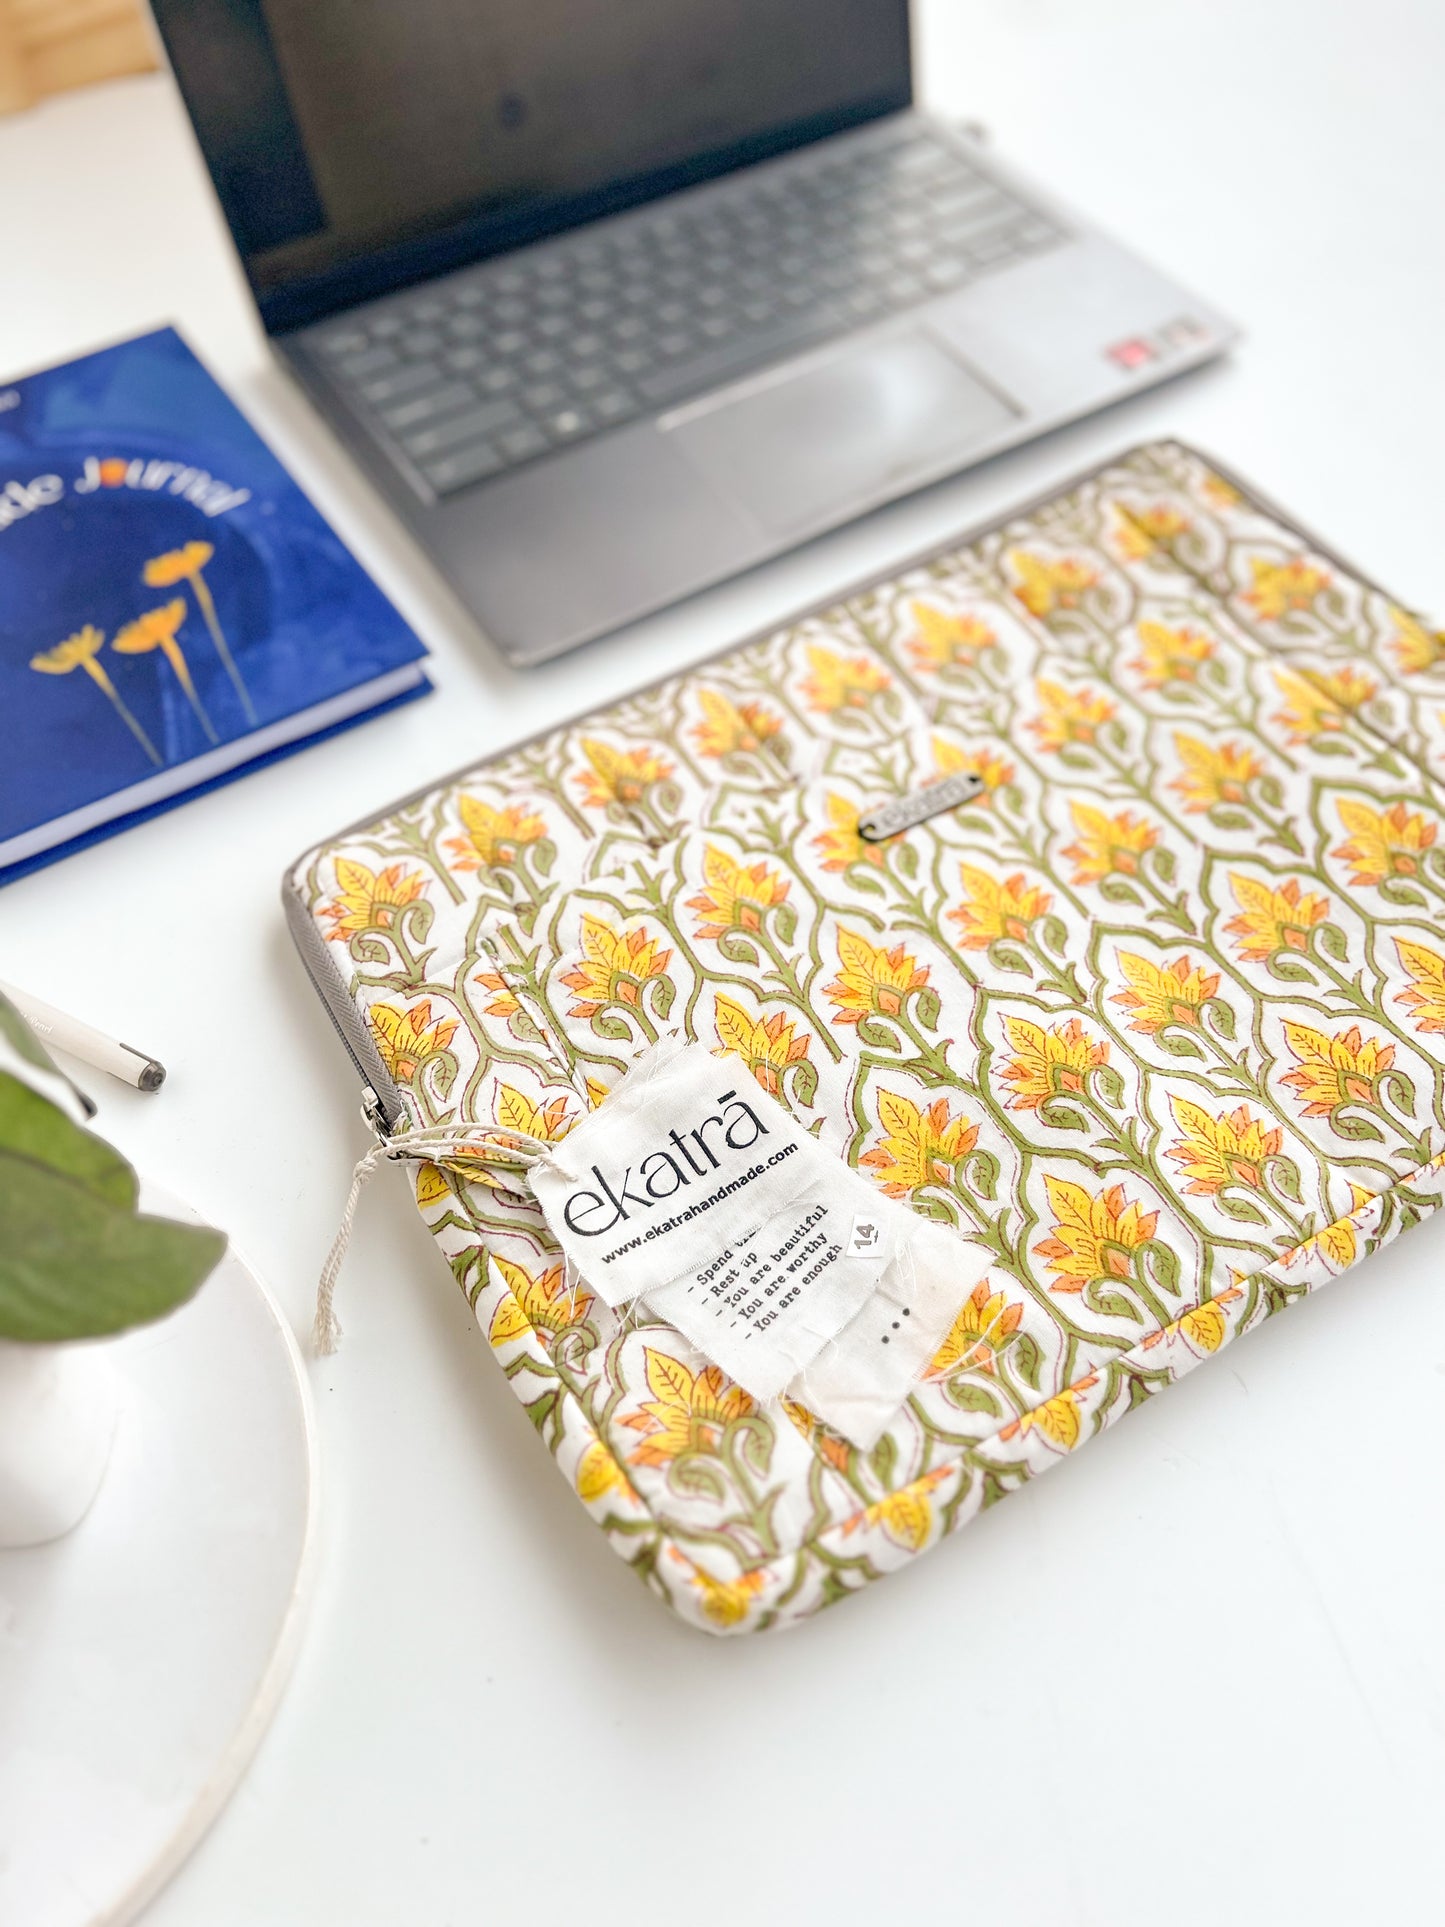 Sustainable Handmade Cotton Laptop Sleeve/Laptop Cover by Ekatra - Yellow motif